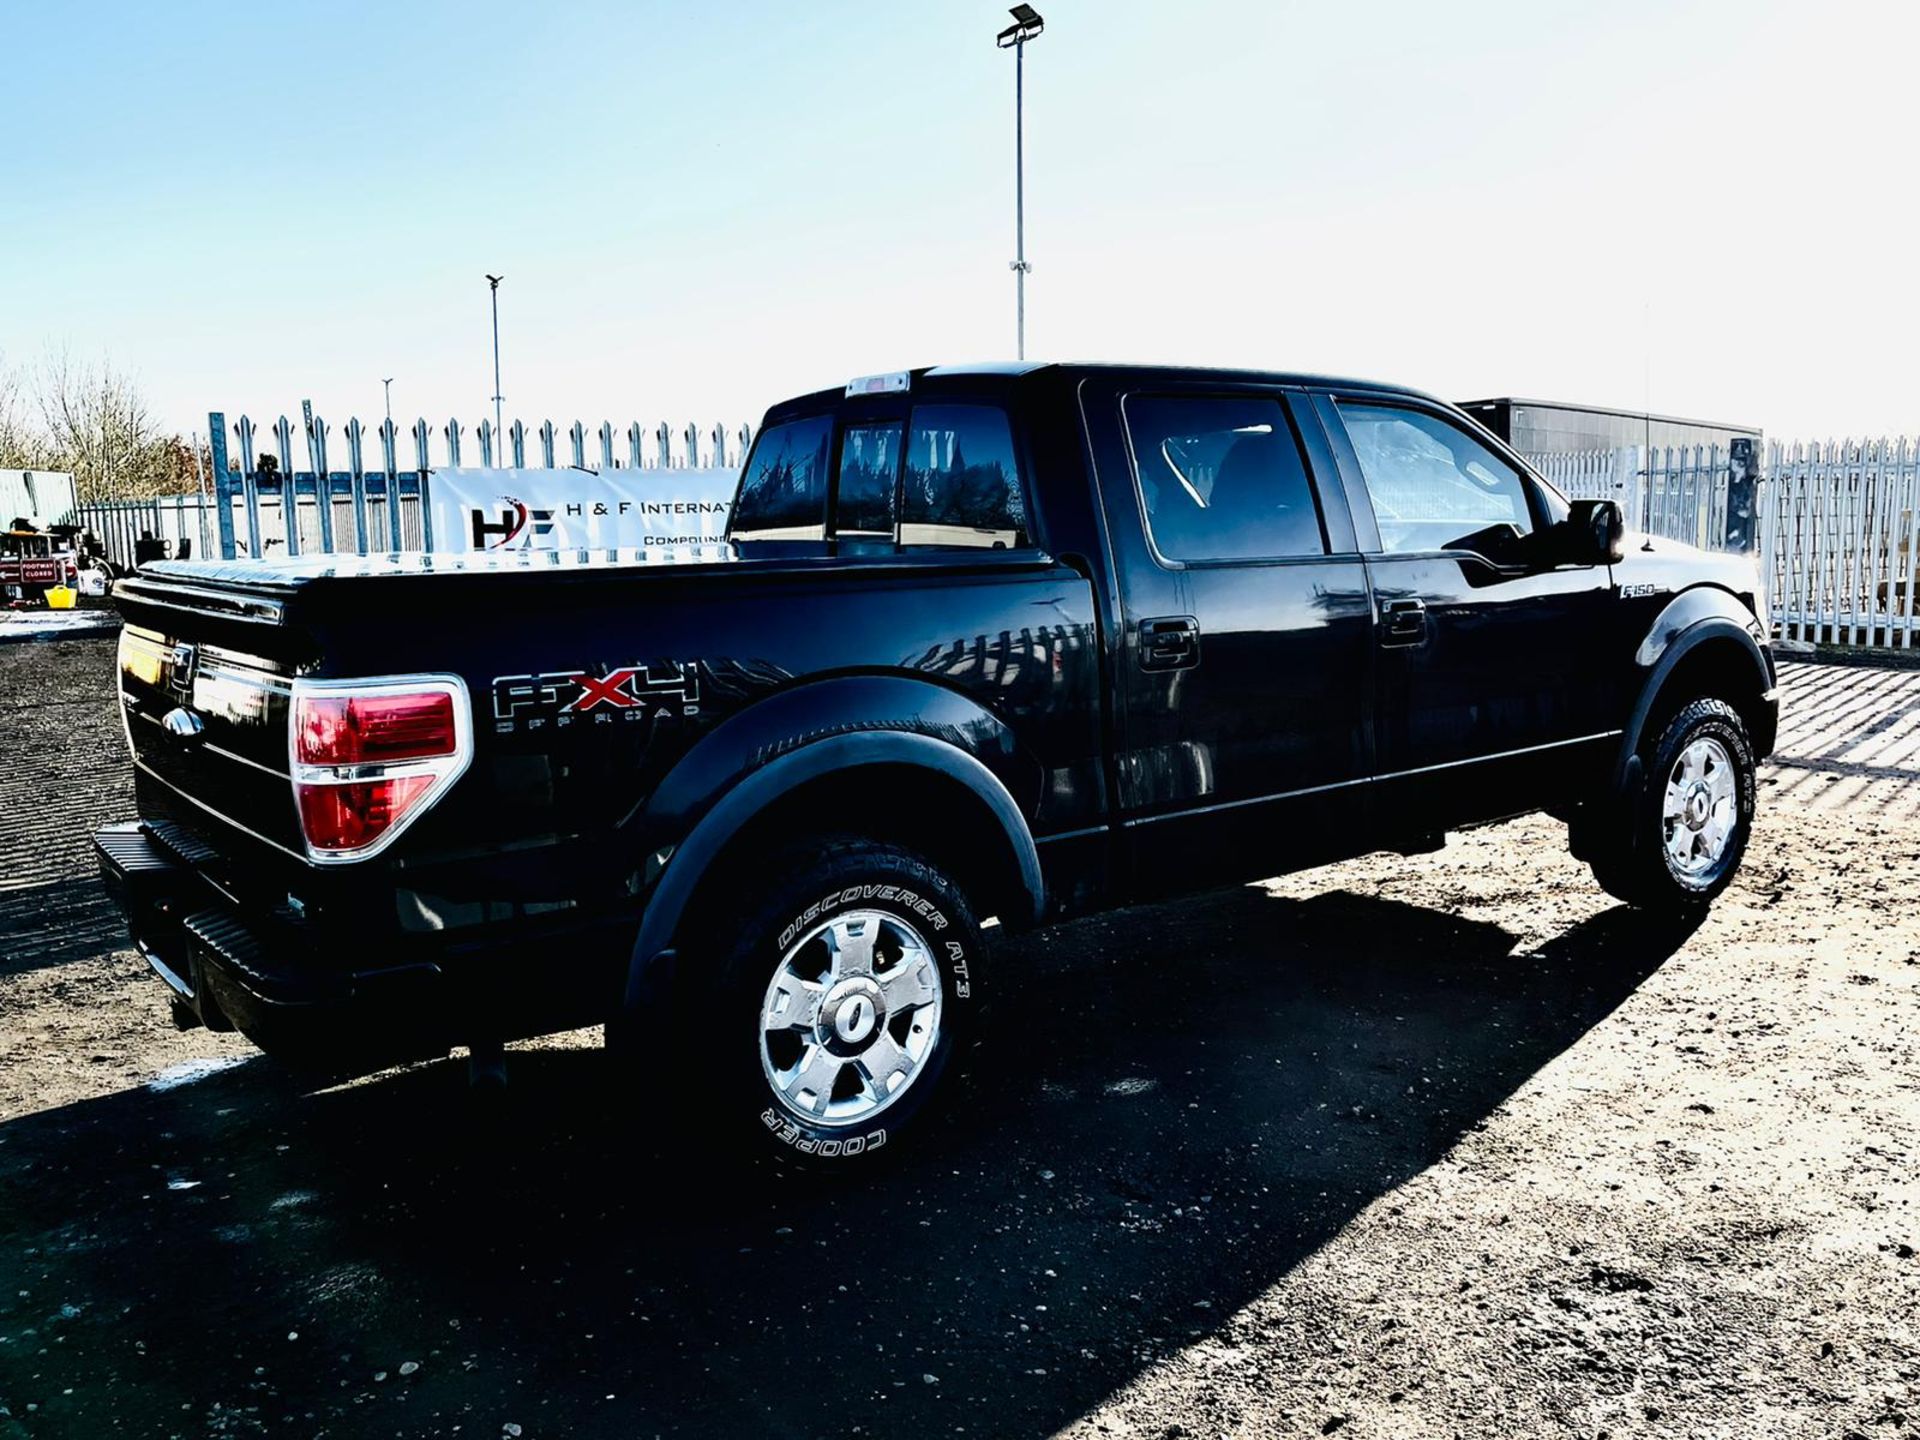 Ford F-150 5.4L V8 SuperCab 4WD FX4 Edition '2010 Year' Colour Coded Package - Top Spec - Image 17 of 44